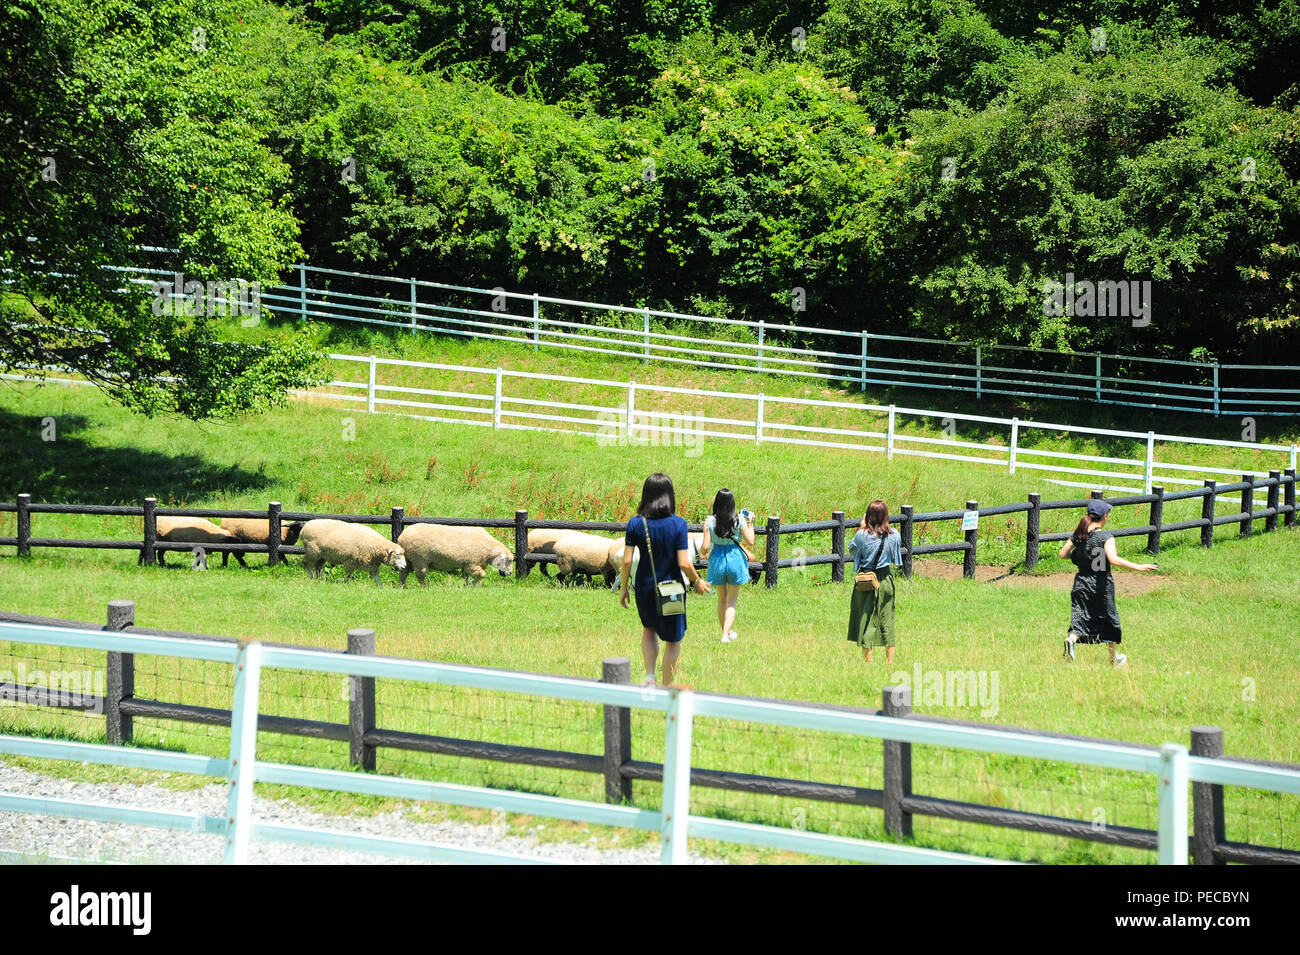 Japanese Young Female tourists are pleased with pastured animals Stock Photo